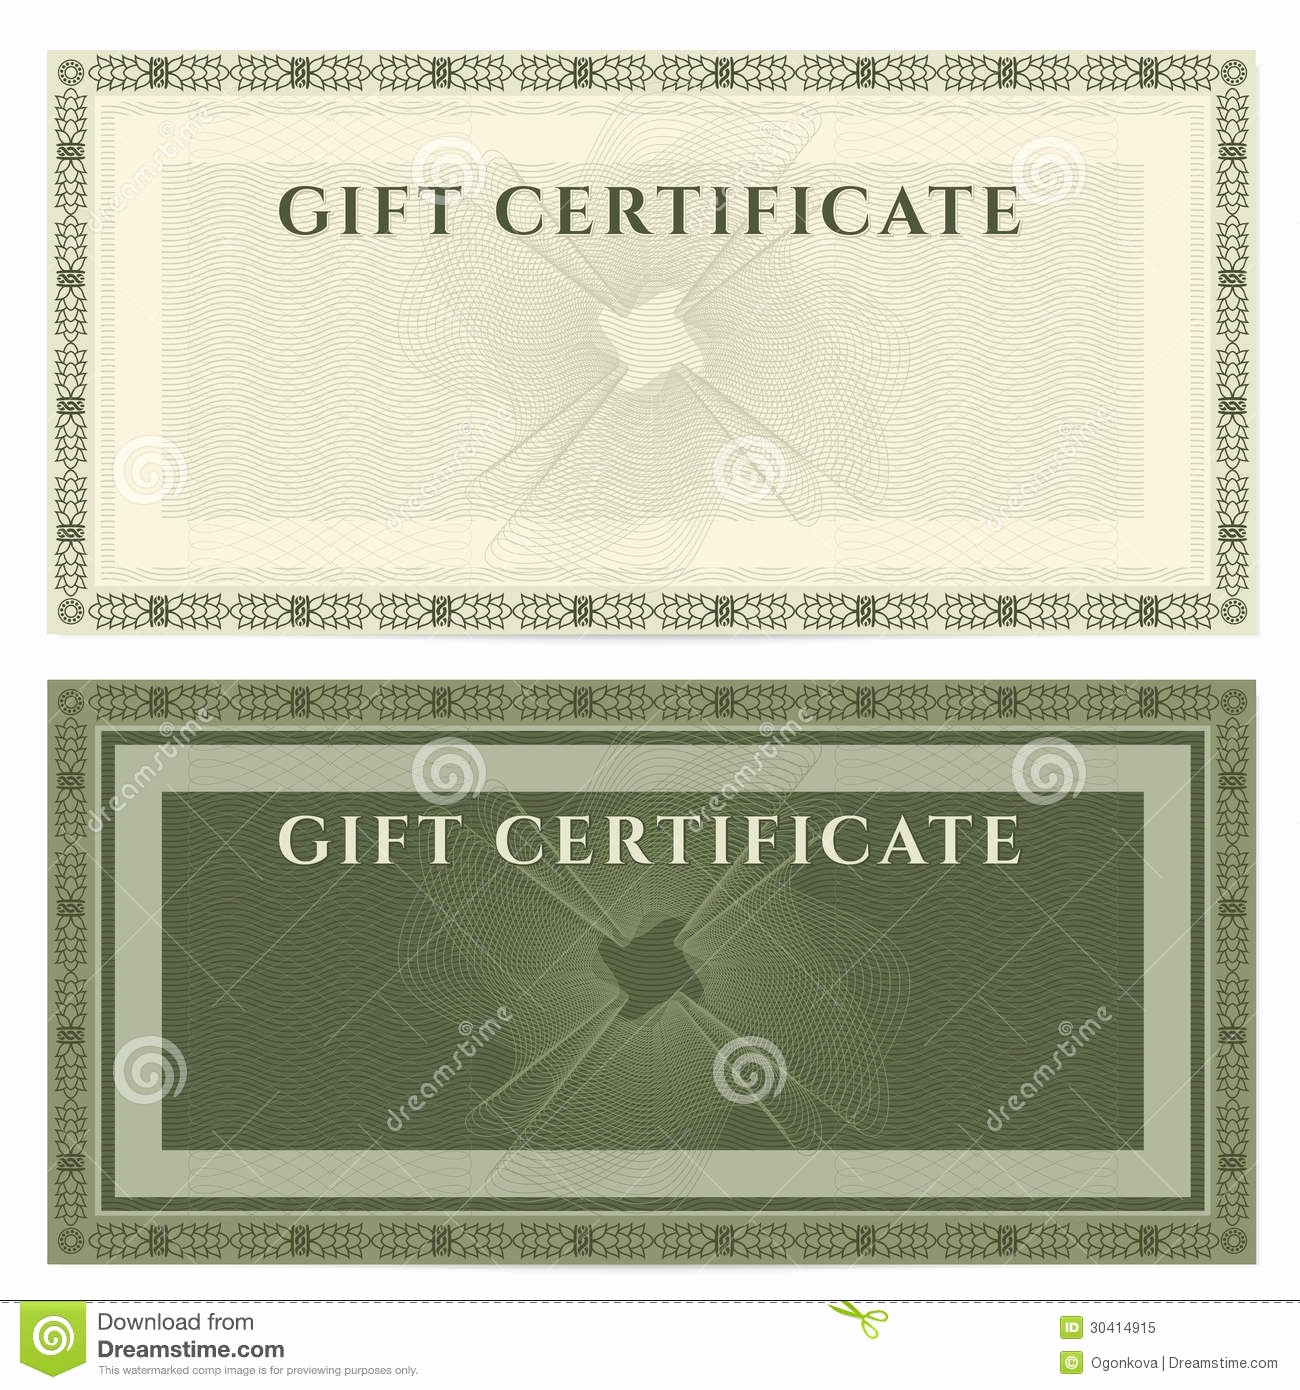 Create A Gift Certificate Free Fresh Vintage Voucher Coupon Template with Border Royalty Free